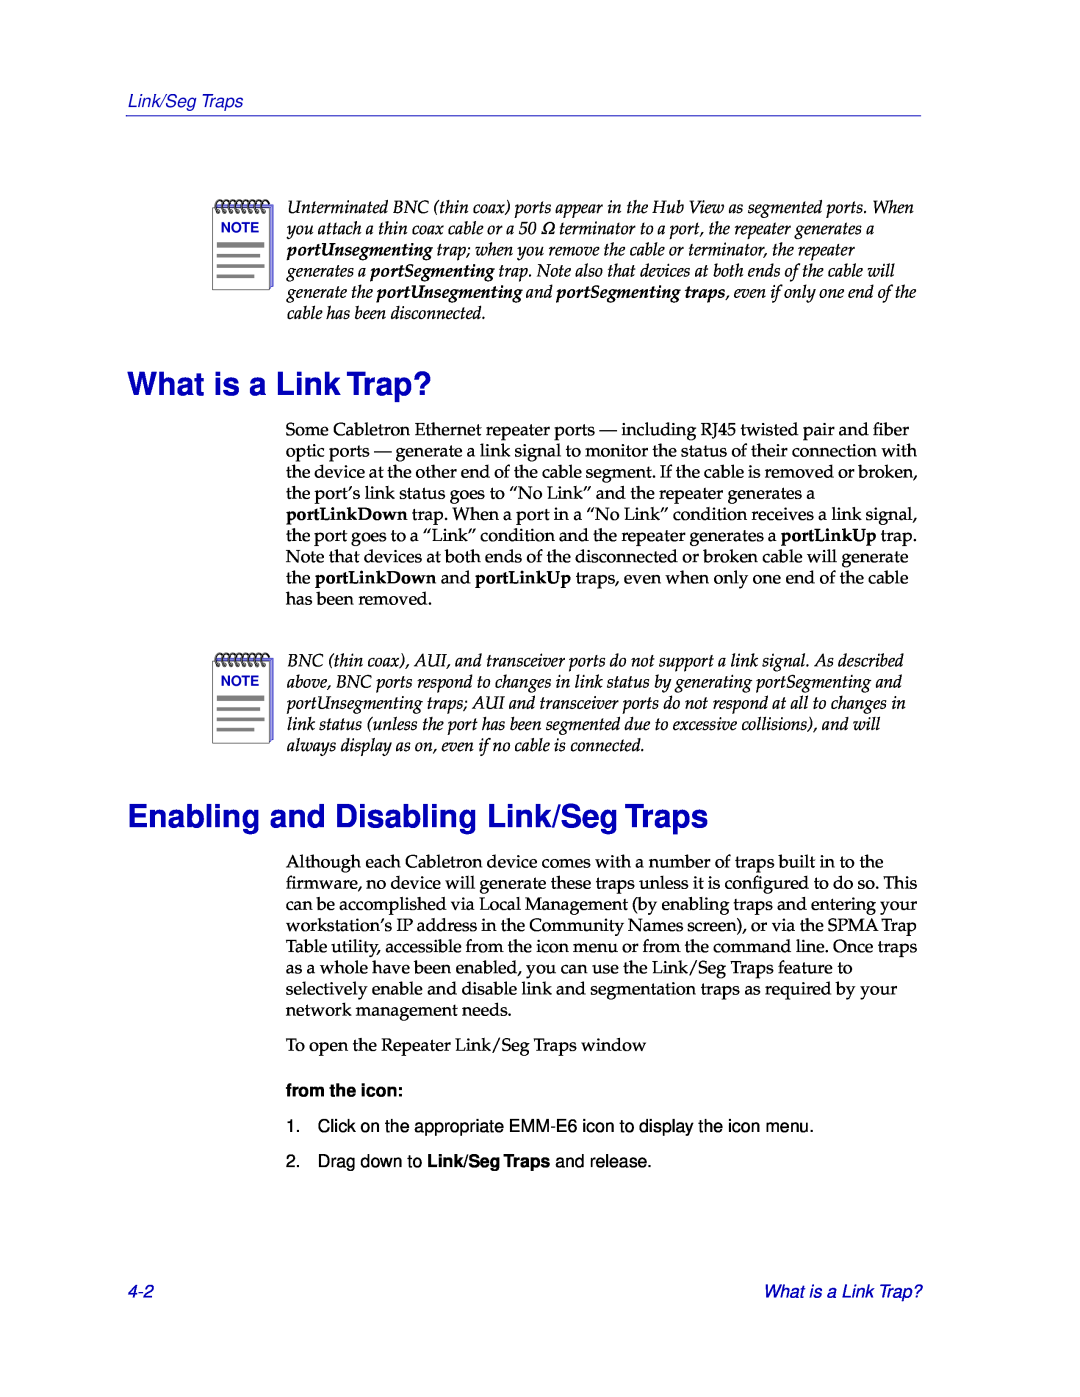 Cabletron Systems EMM-E6 manual What is a Link Trap?, Enabling and Disabling Link/Seg Traps, from the icon 